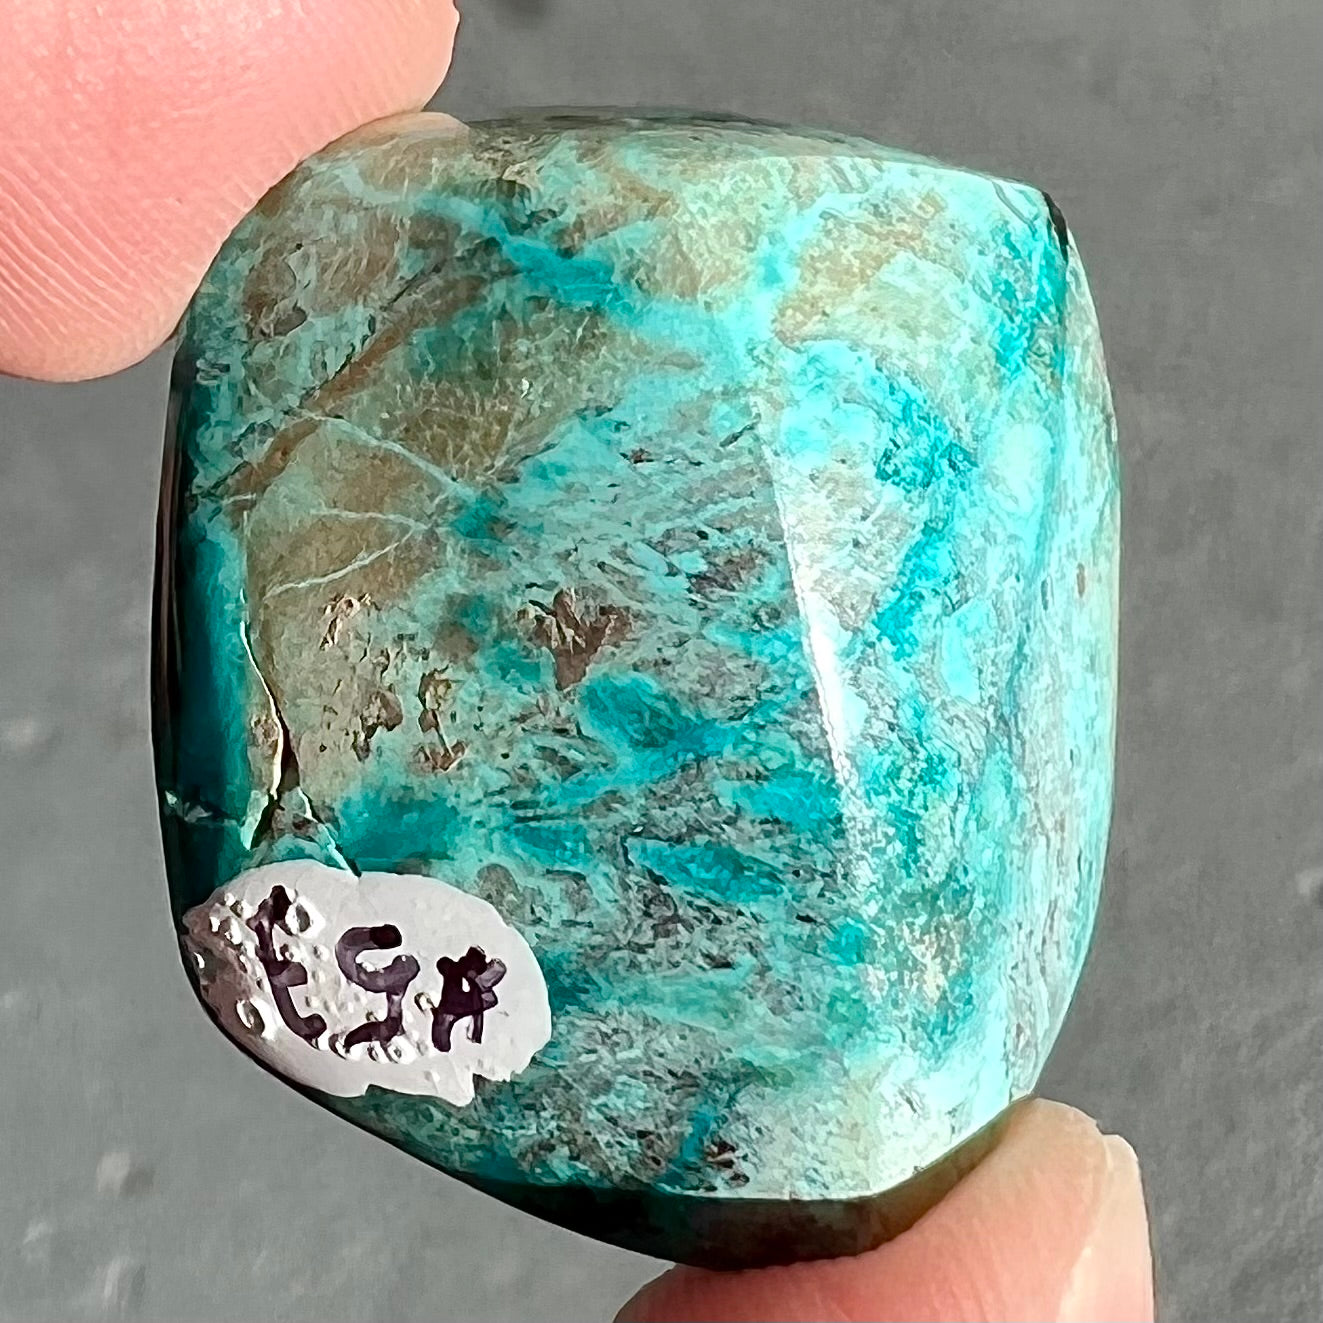 A loose, polished turquoise specimen with azurite inclusions.